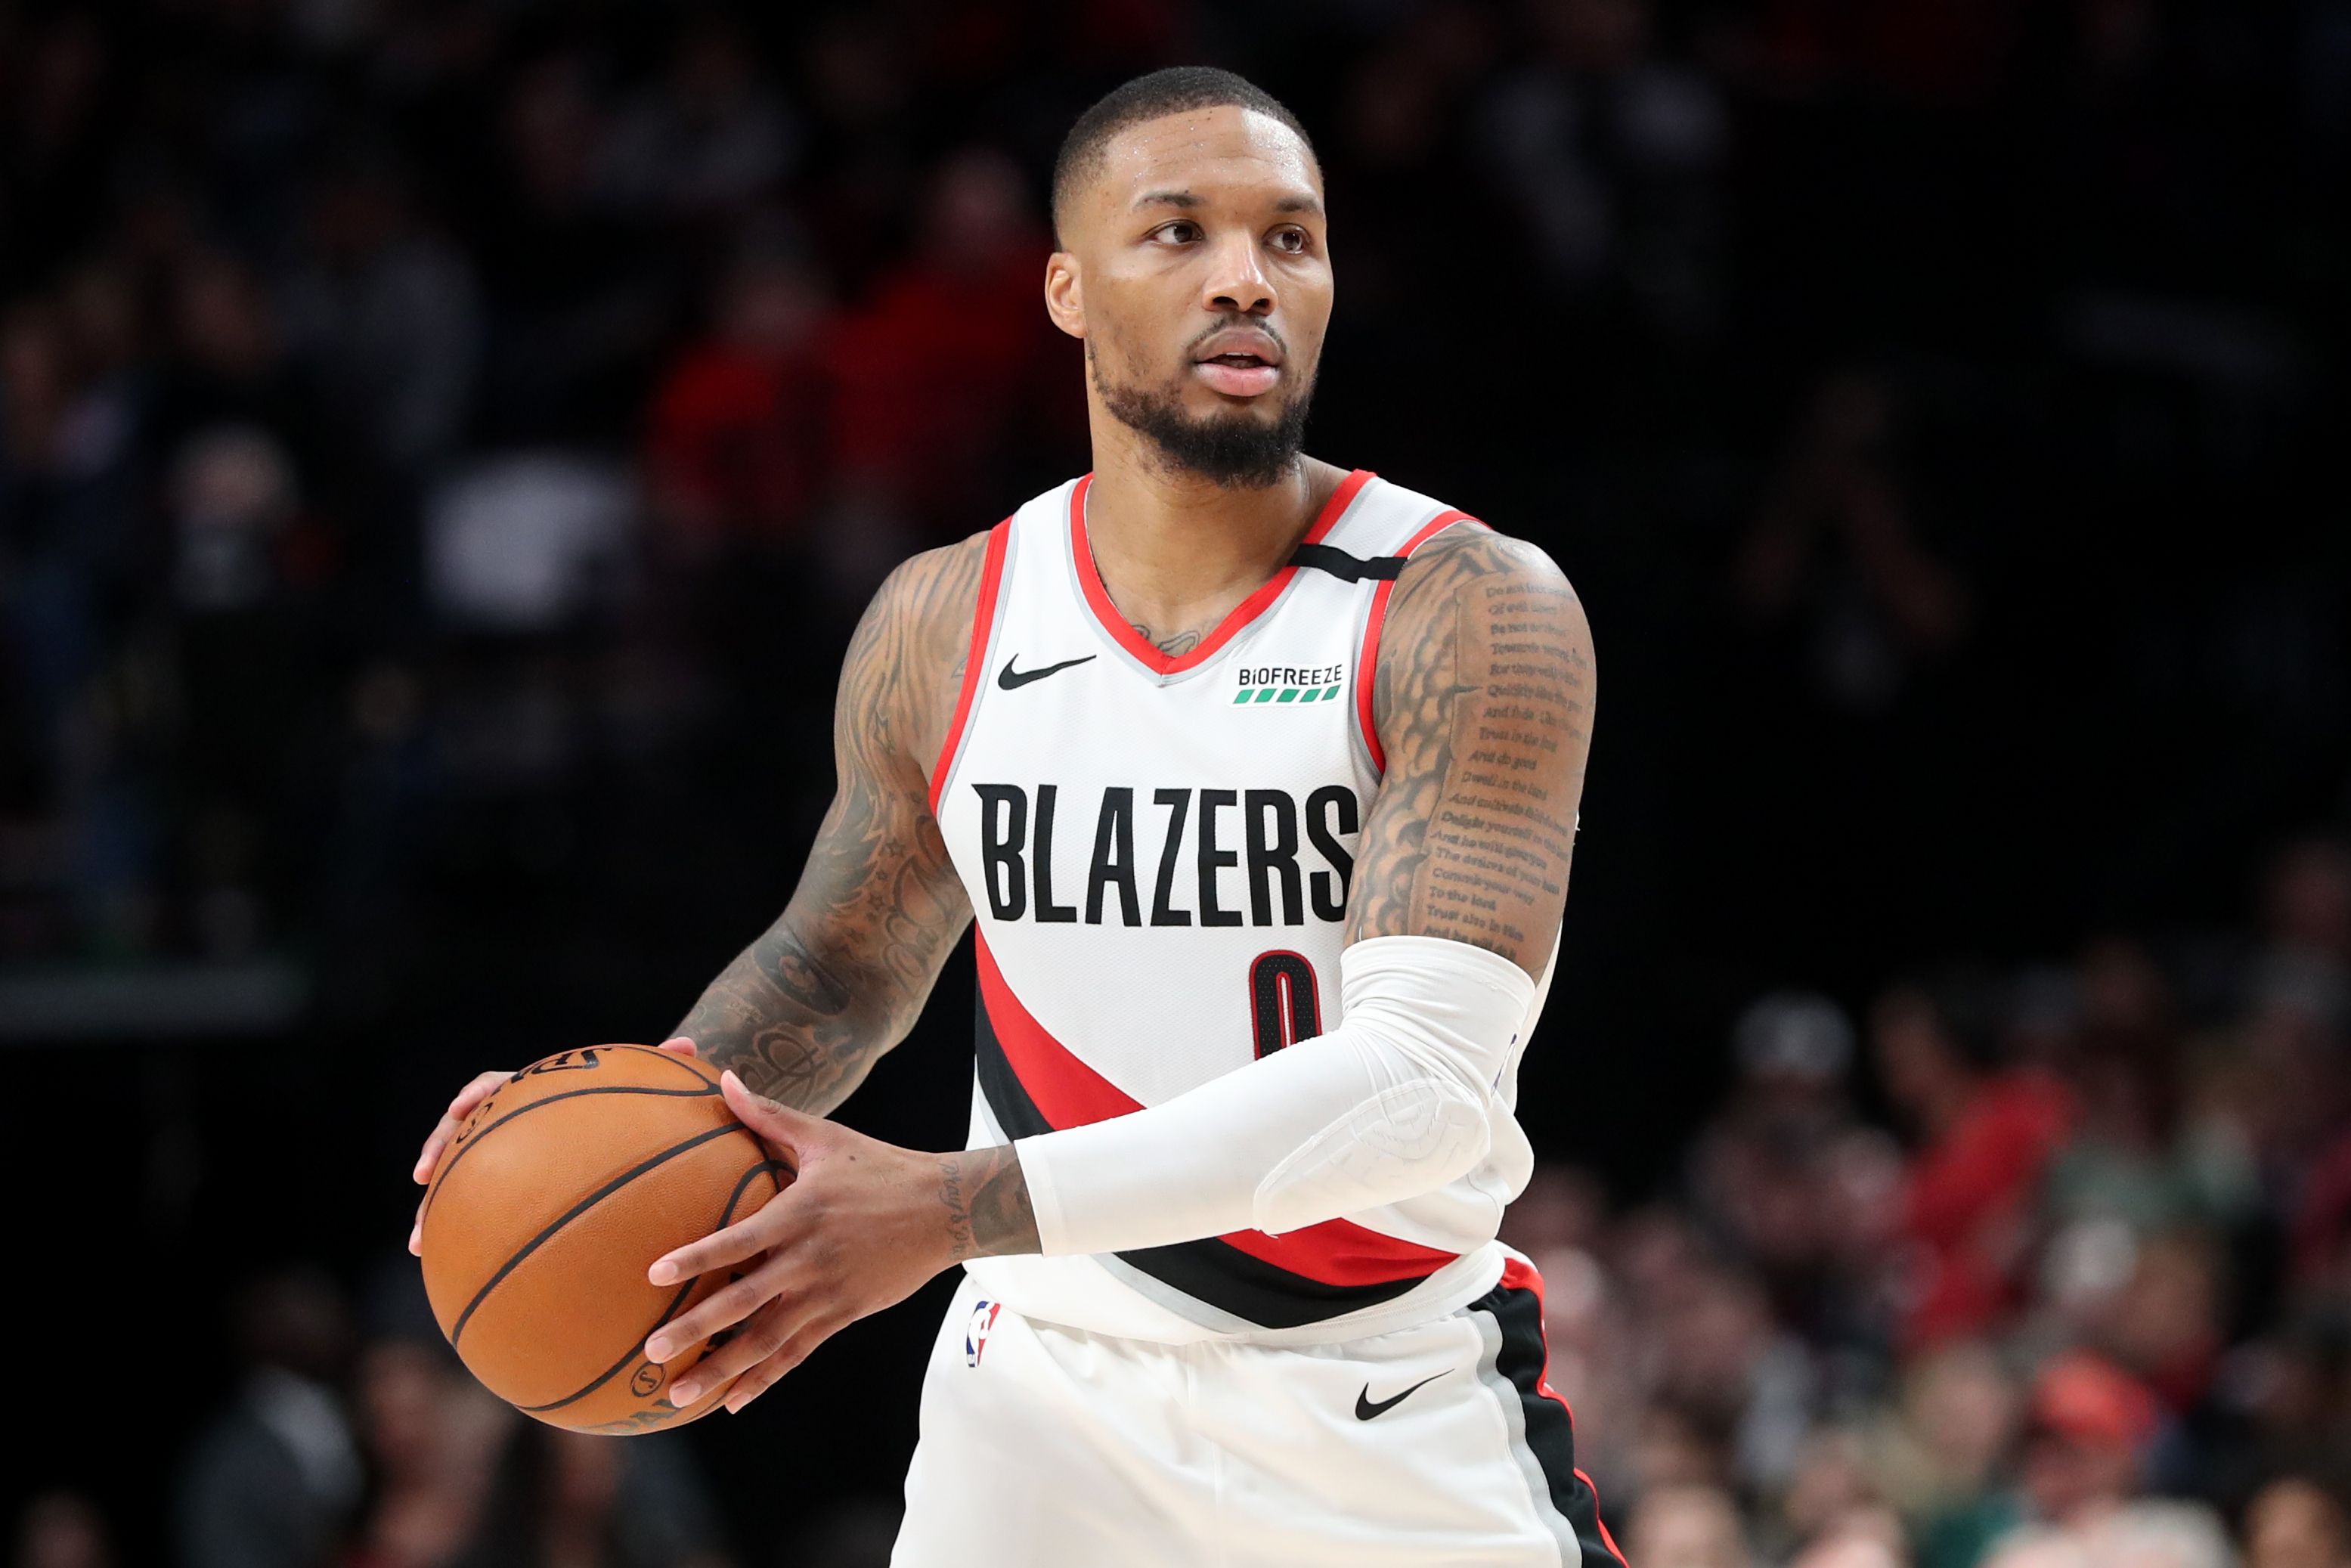 Damian Lillard #0 of the Portland Trail Blazers during a game against the San Antonio Spurs at Moda Center on February 06, 2020 in Portland, Oregon | Photo: Getty Images